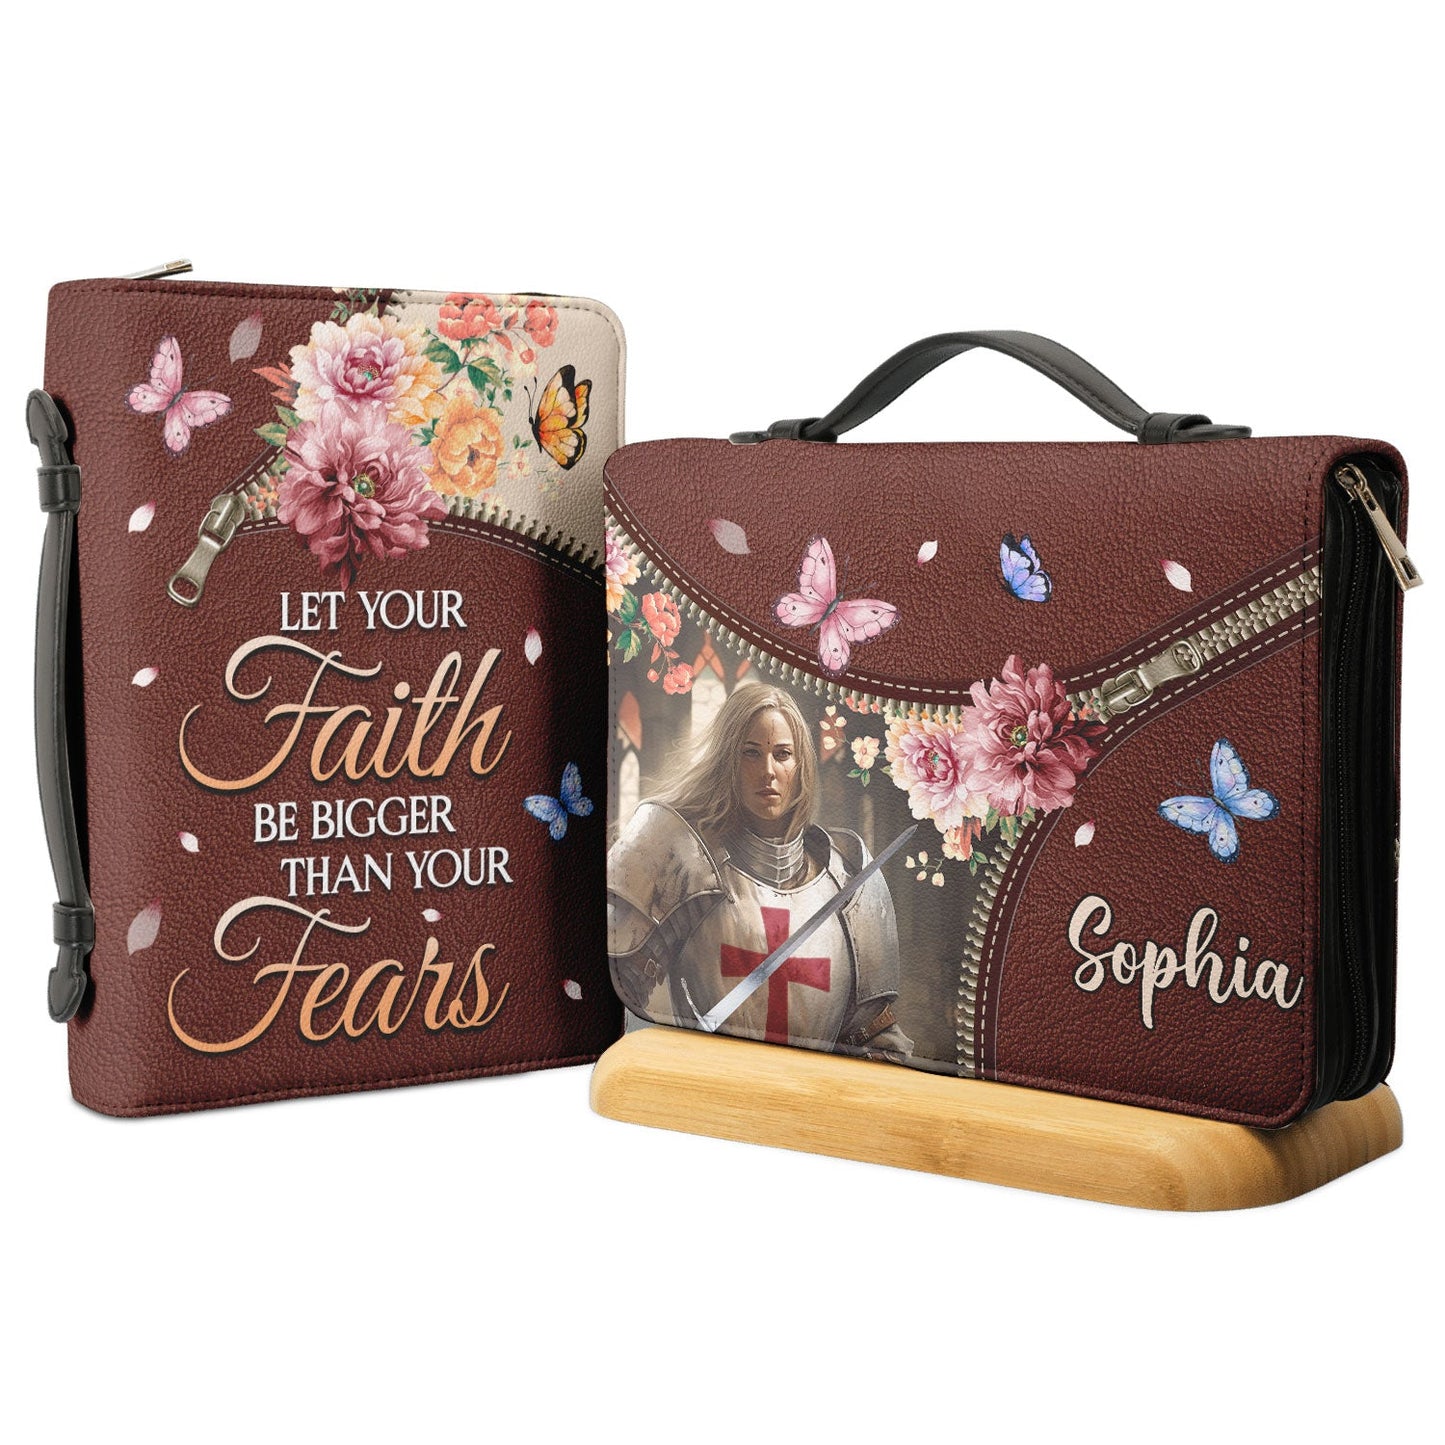 Let Your Faith Be Bigger Than Your Fear Knights Templar Personalized Bible Cover - Christian Bible Covers For Women